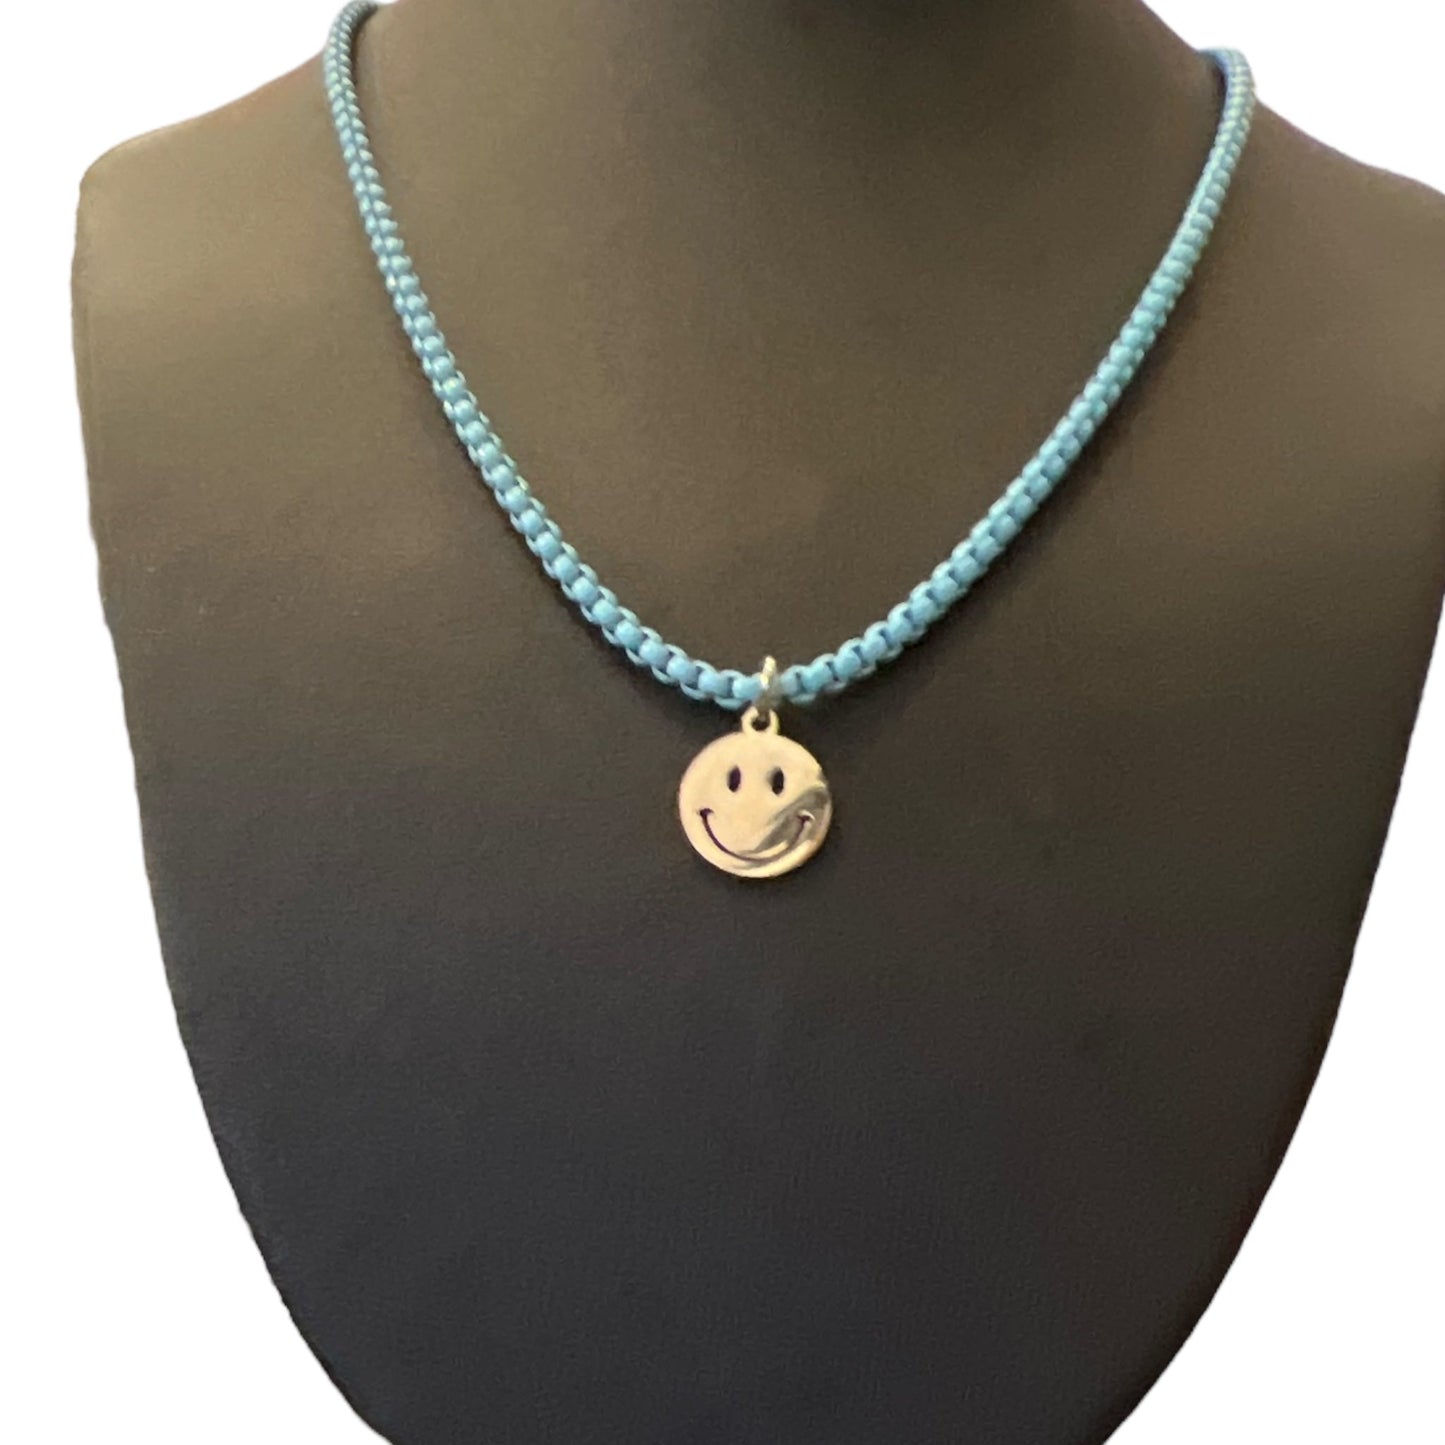 Smiley Face Necklace - Something about Sofia